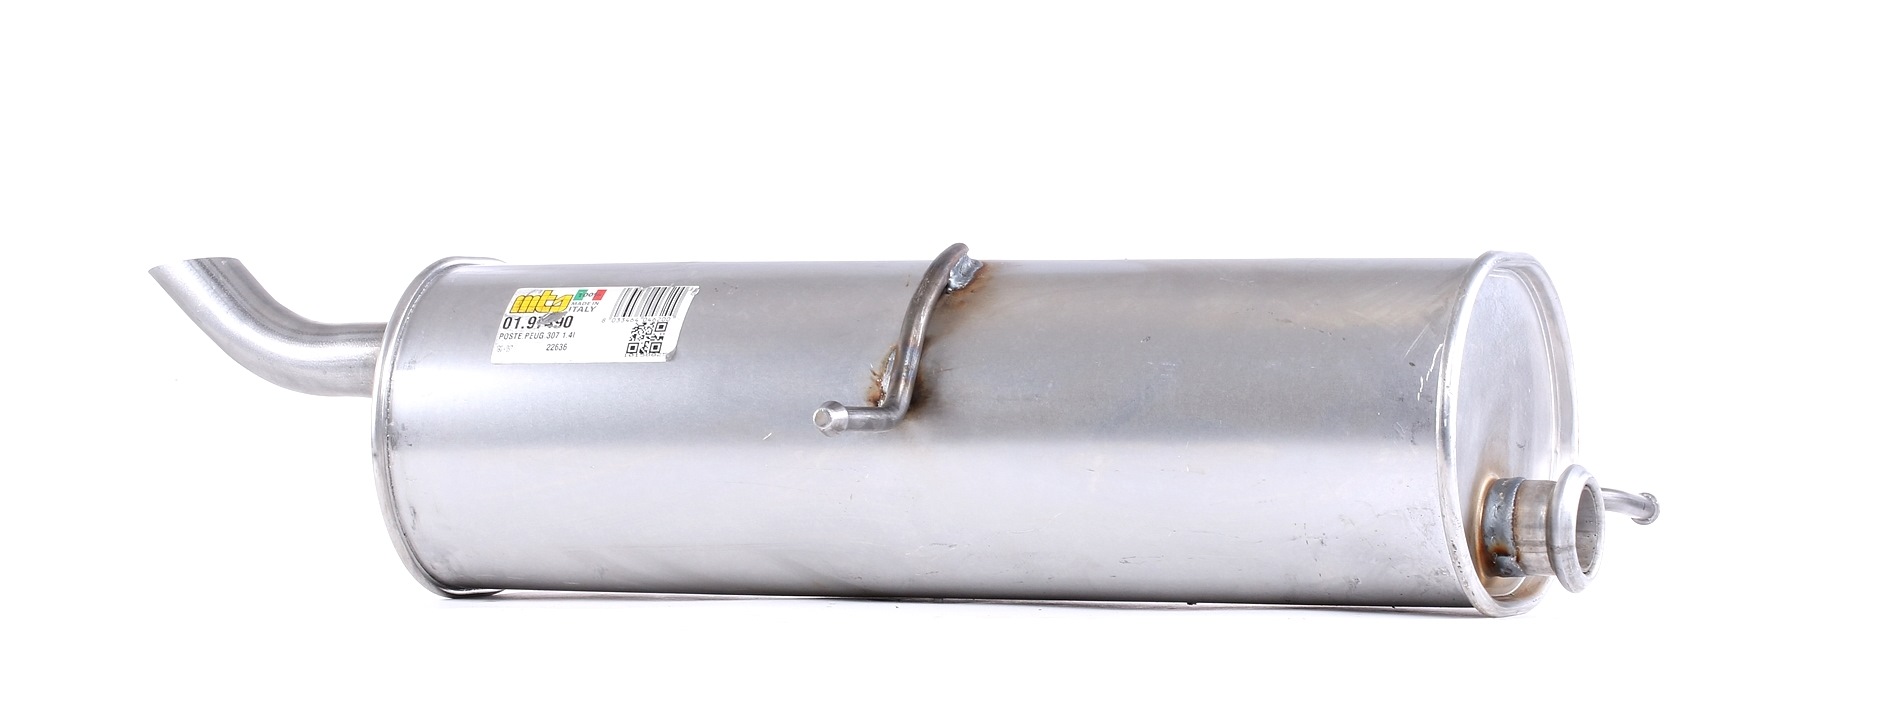 MTS Exhaust silencer universal and sports PEUGEOT 309 I Hatchback new 01.97490